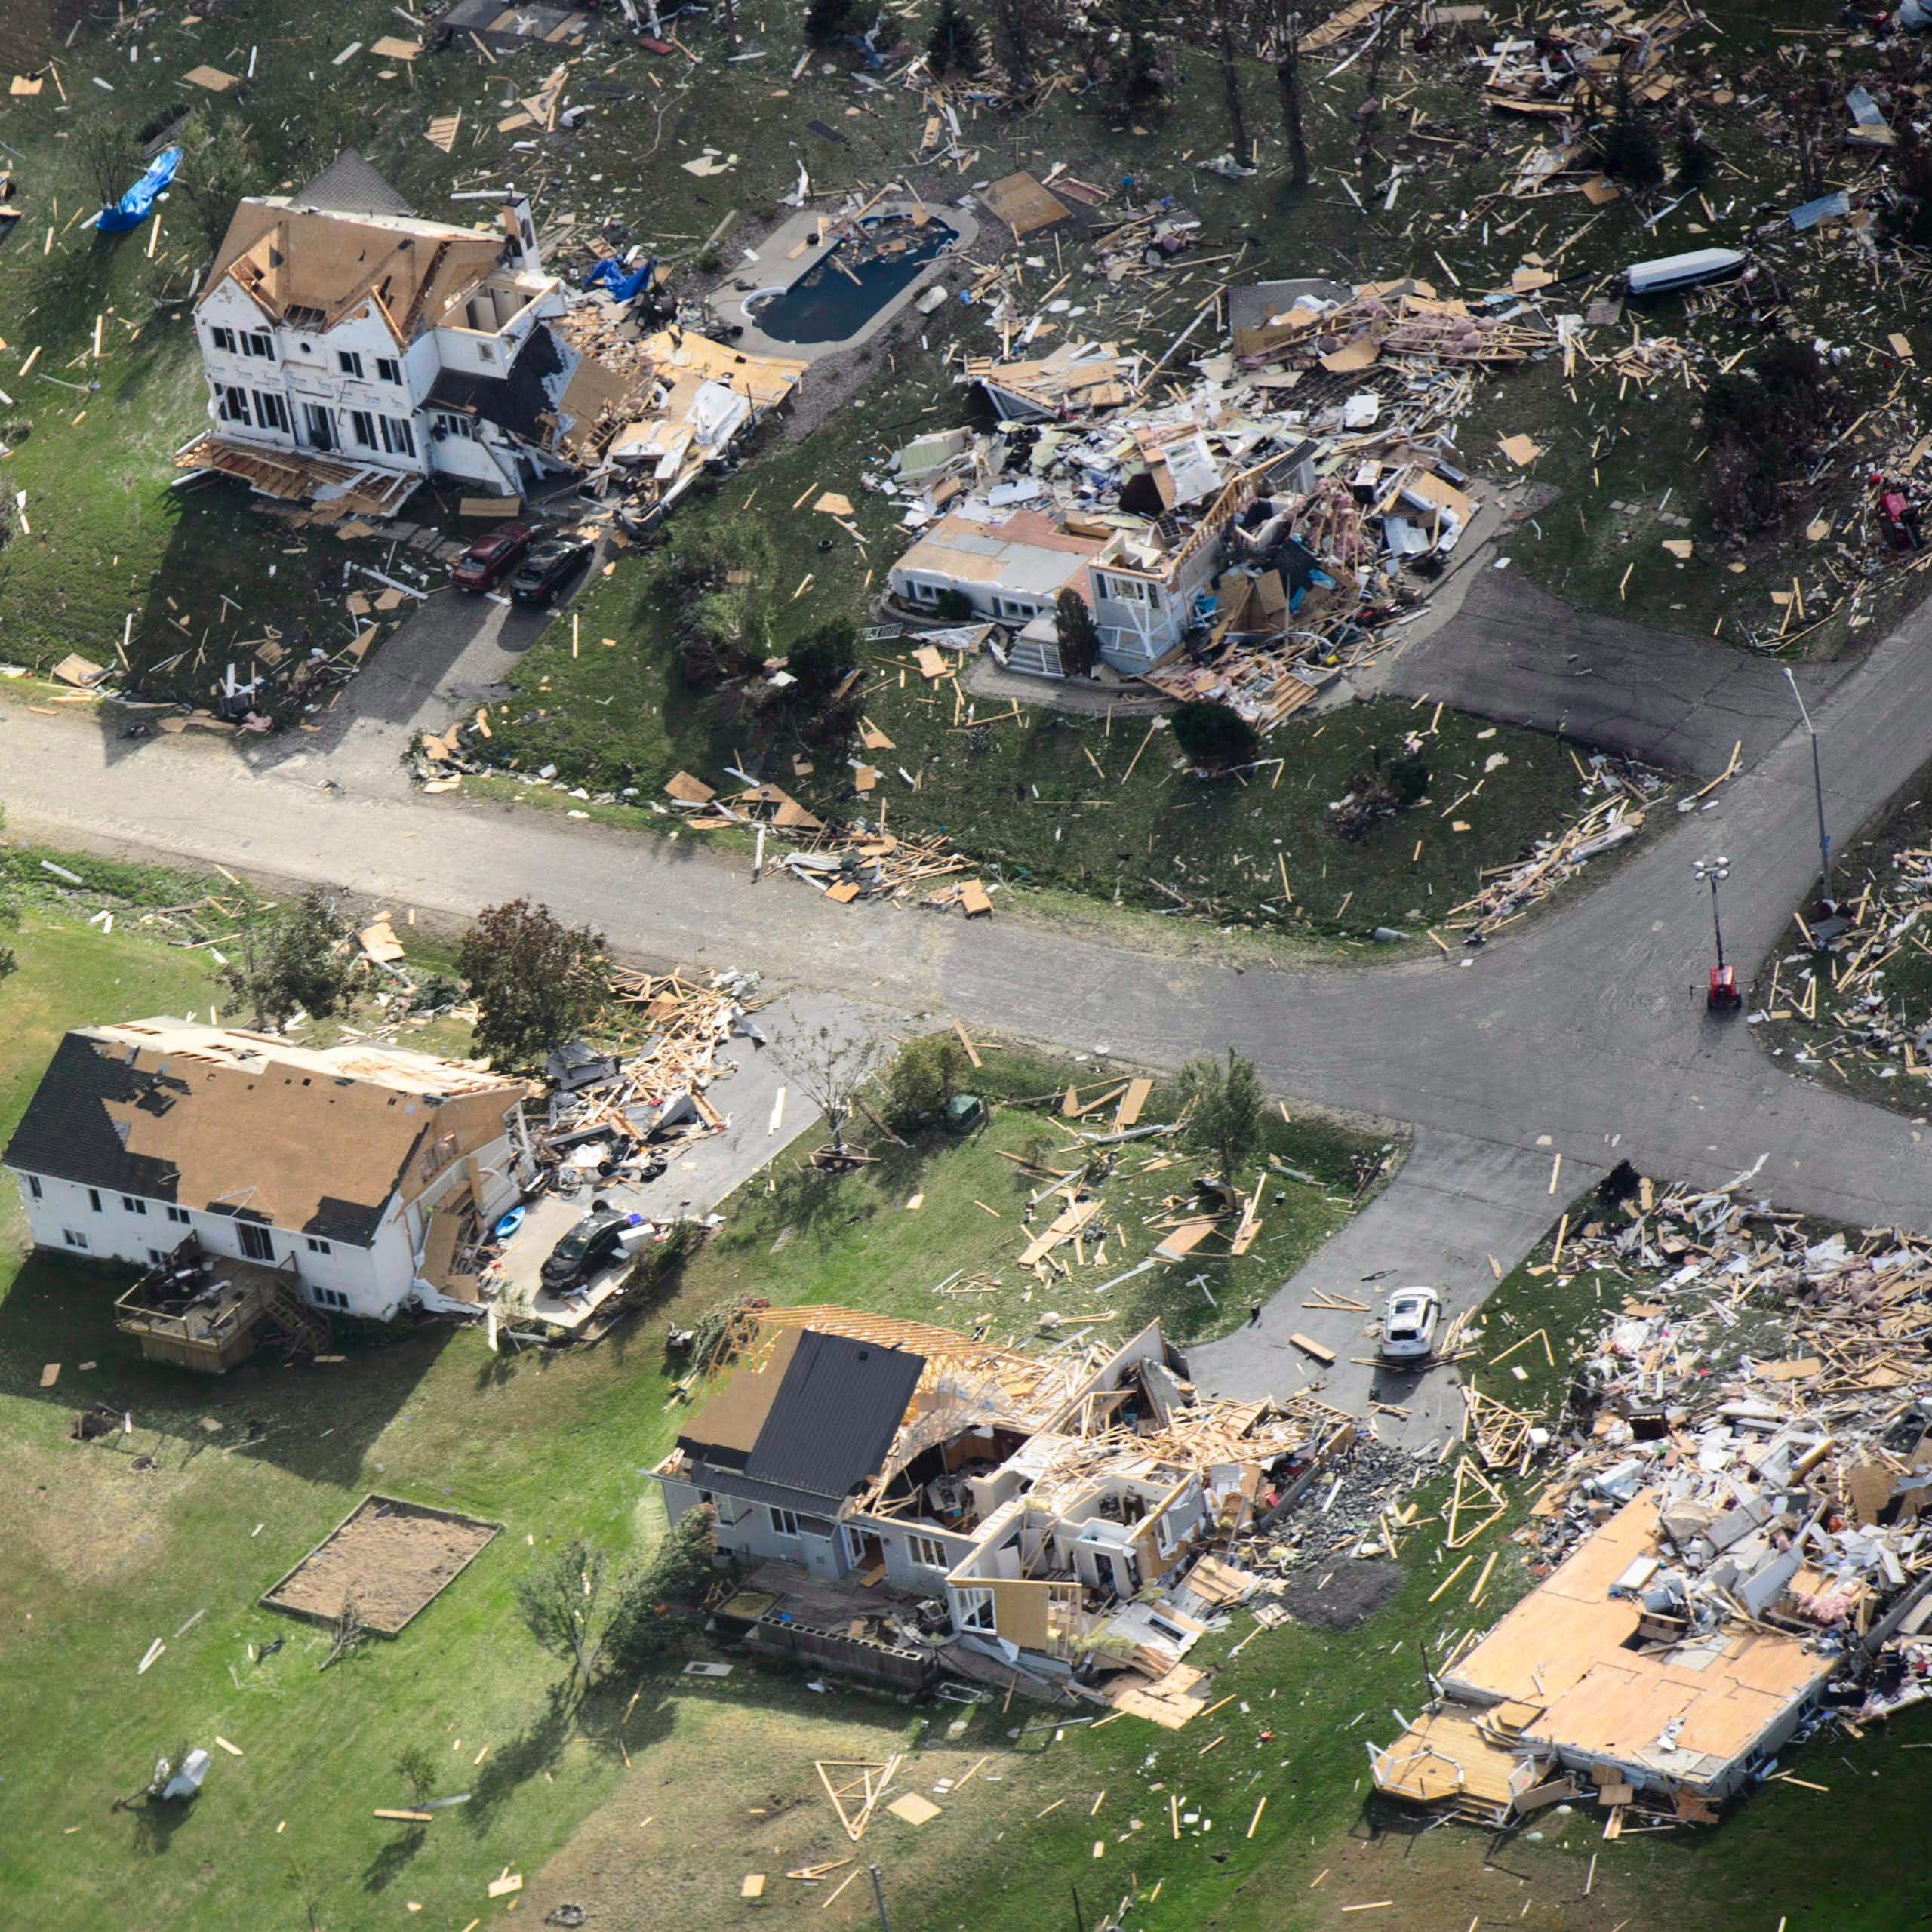 An aerial view of destroyed houses.